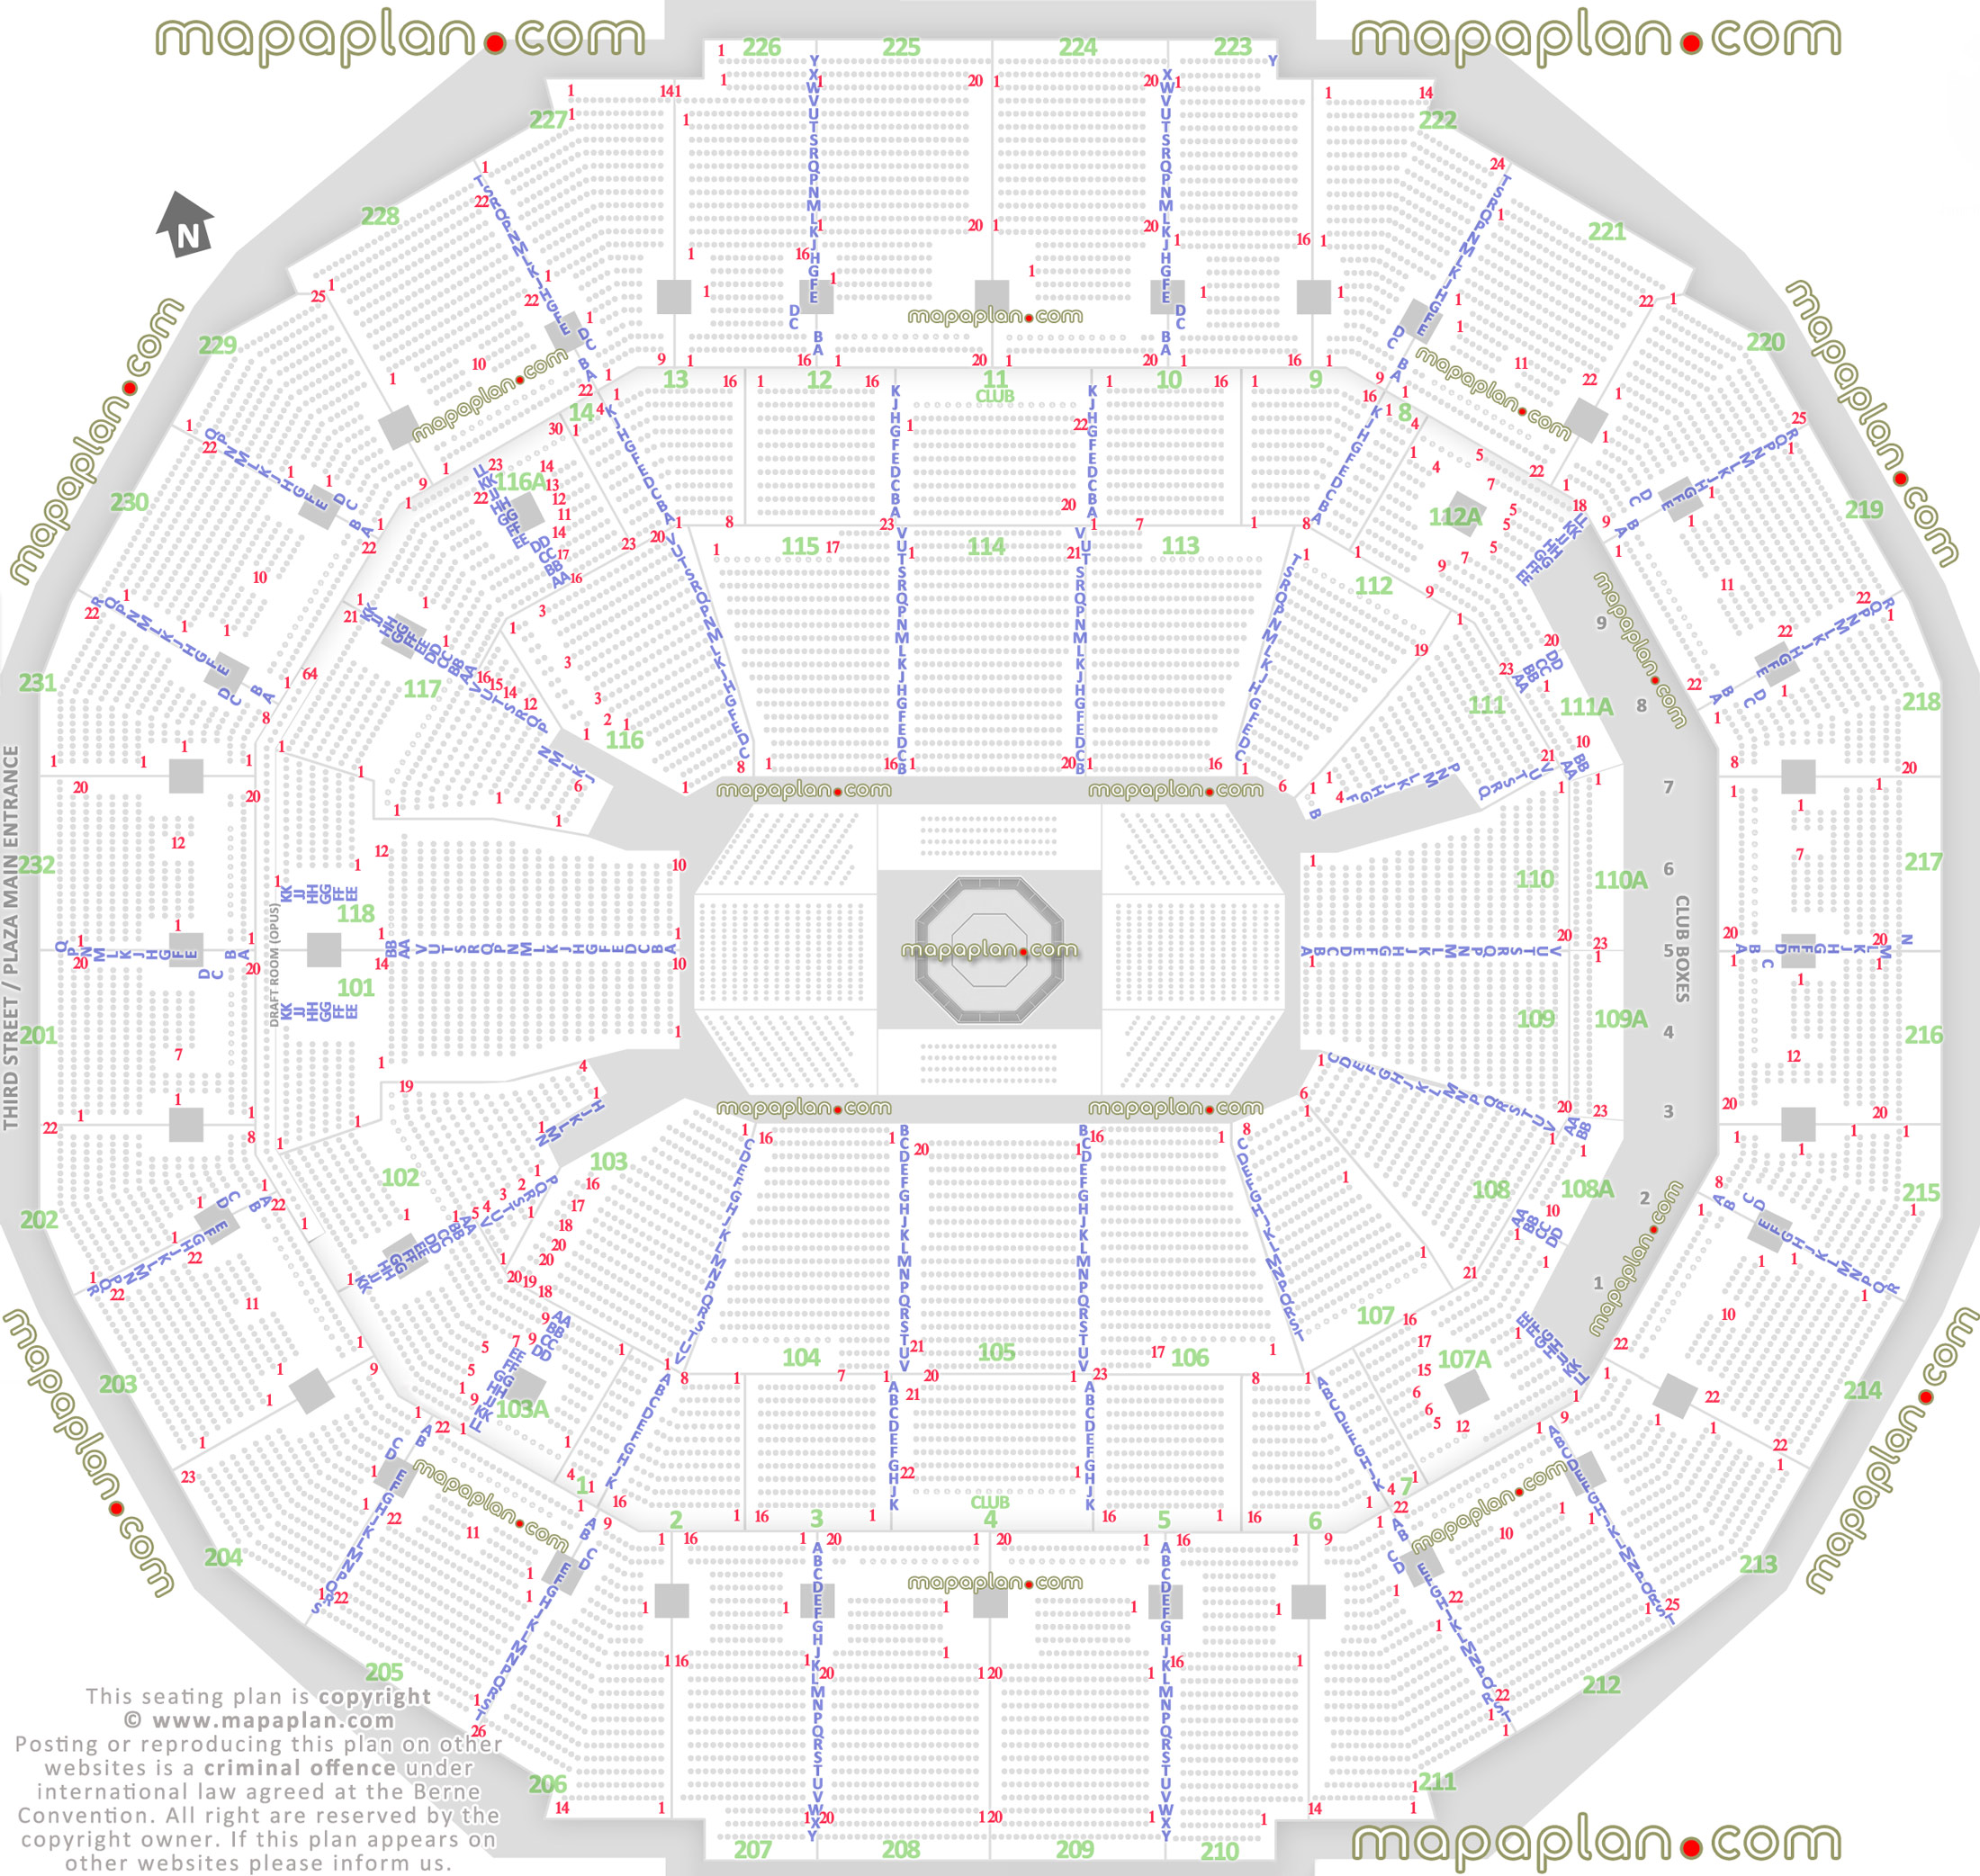 ufc mma fights memphis tennessee usa detailed seating capacity arrangement arena row numbers layout plaza main entrance gate exits map west east south north detailed fully seated chart setup standing room only sro areas wheelchair disabled handicap accessible seats plan Memphis FedExForum seating chart